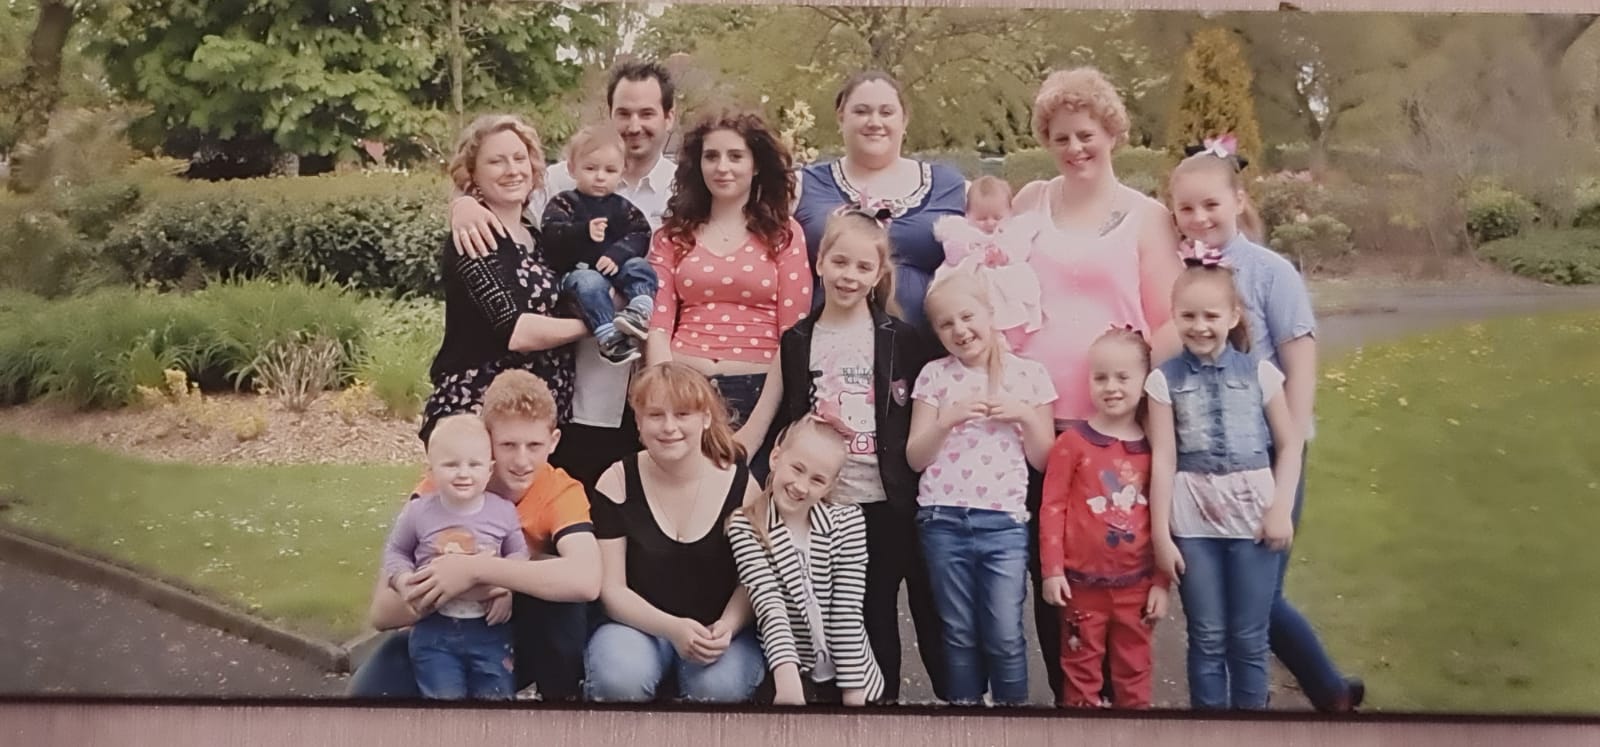 The family of Sonia Partridge, 35, died with coronavirus at University Hospital of North Tees on Tuesday with her wife and three of their 13 children by her side (Family handout/PA).